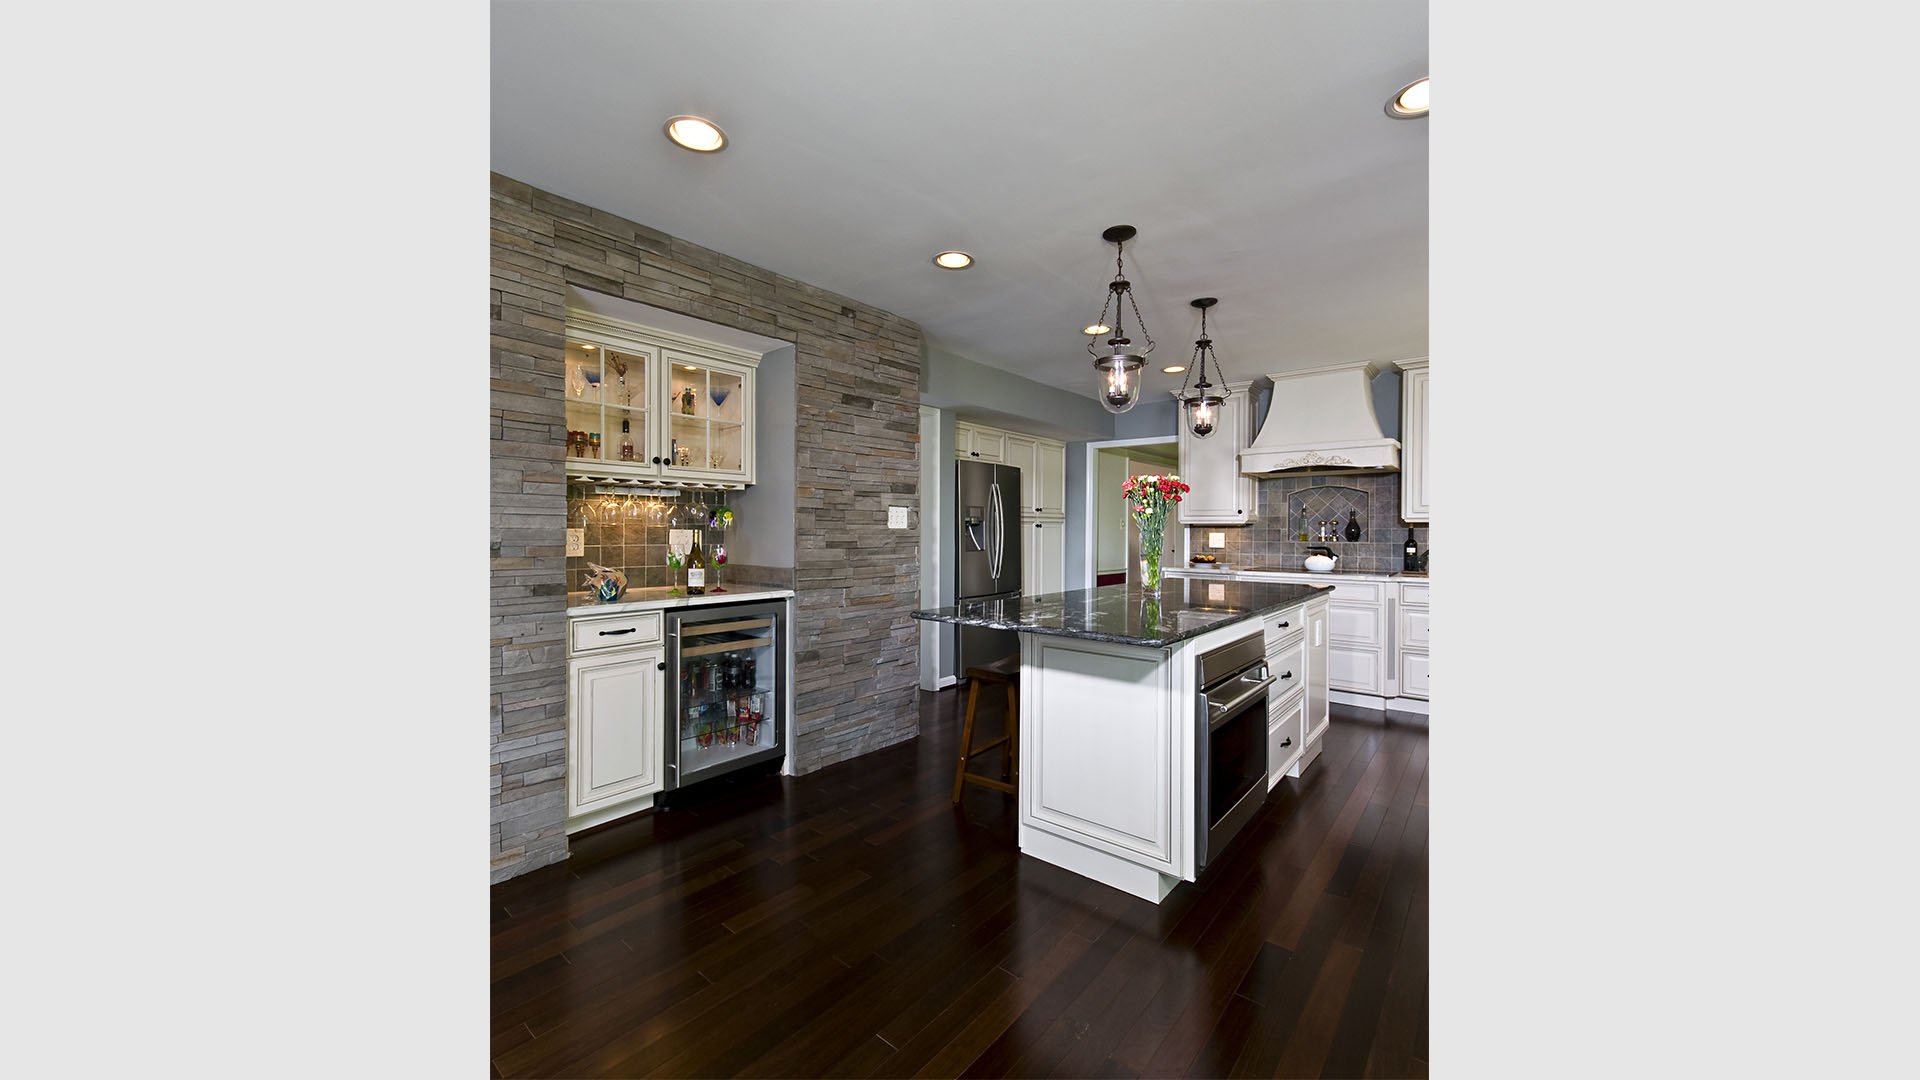 2012 NARI Capital CotY, Honorable Mention Award Winner, Residential Kitchen $50,000 to $100,000